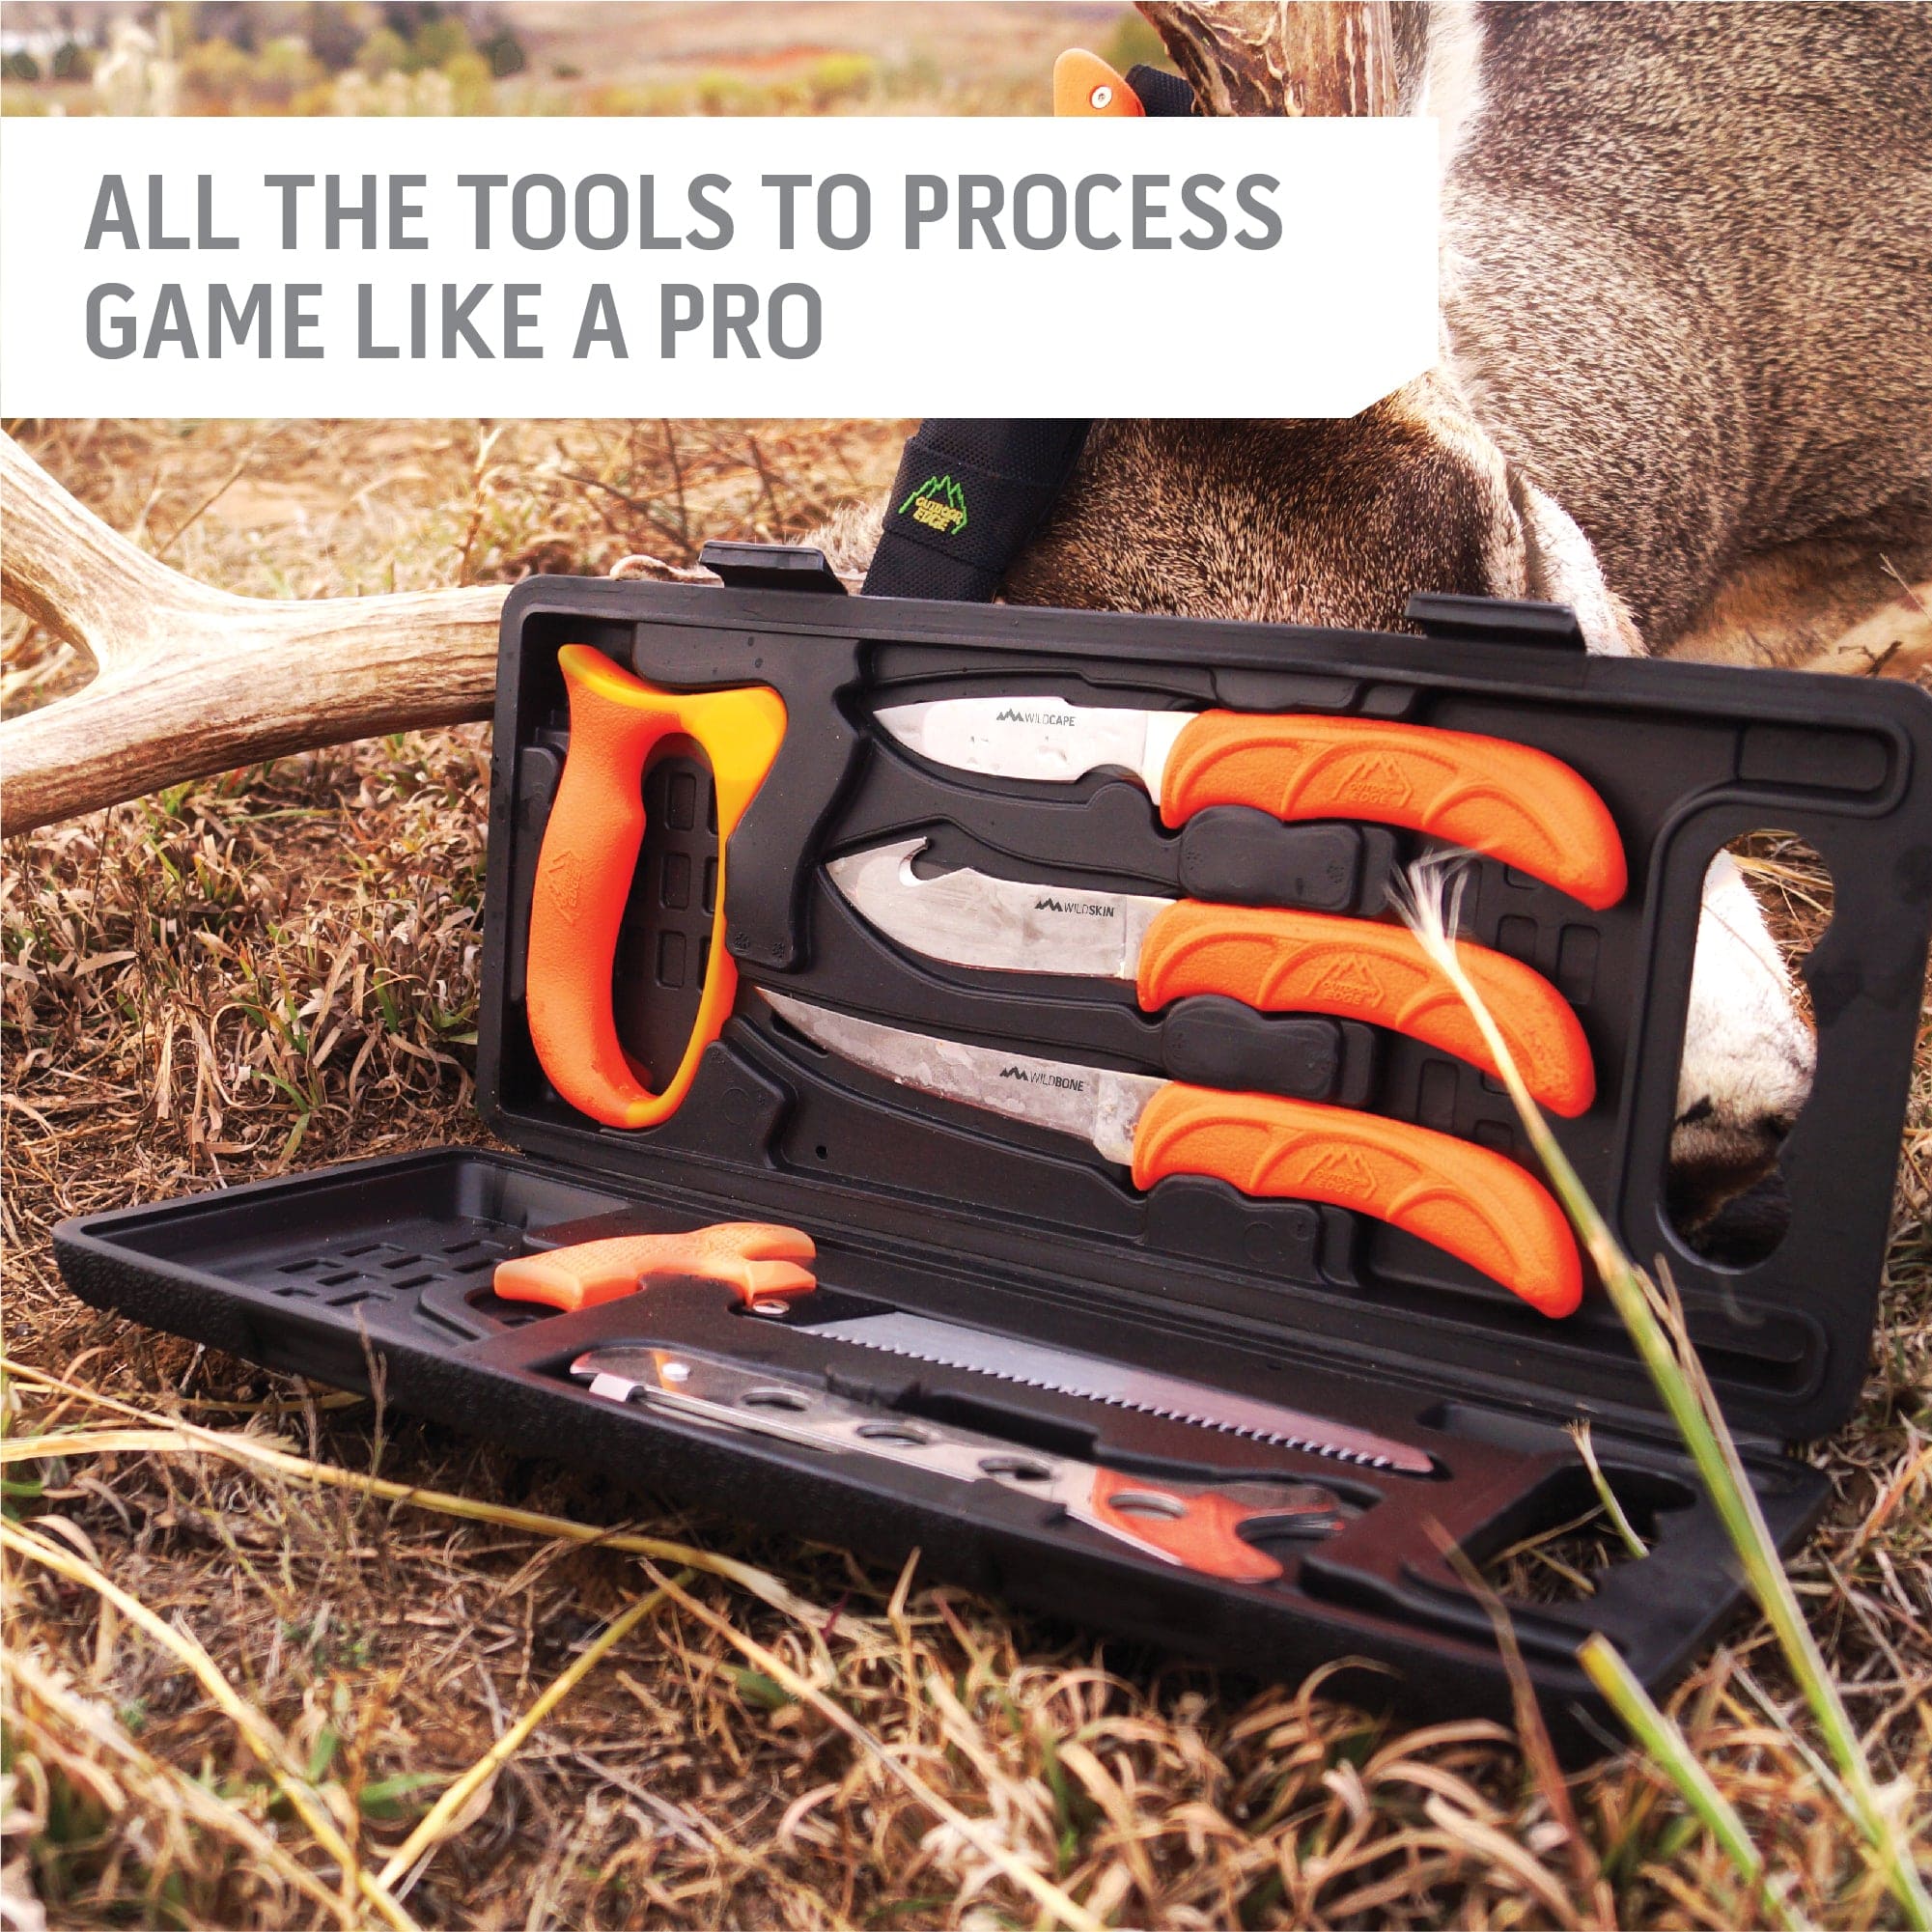 Outdoor Edge Wild Pak complete game processing set showing all knives in case next to deer